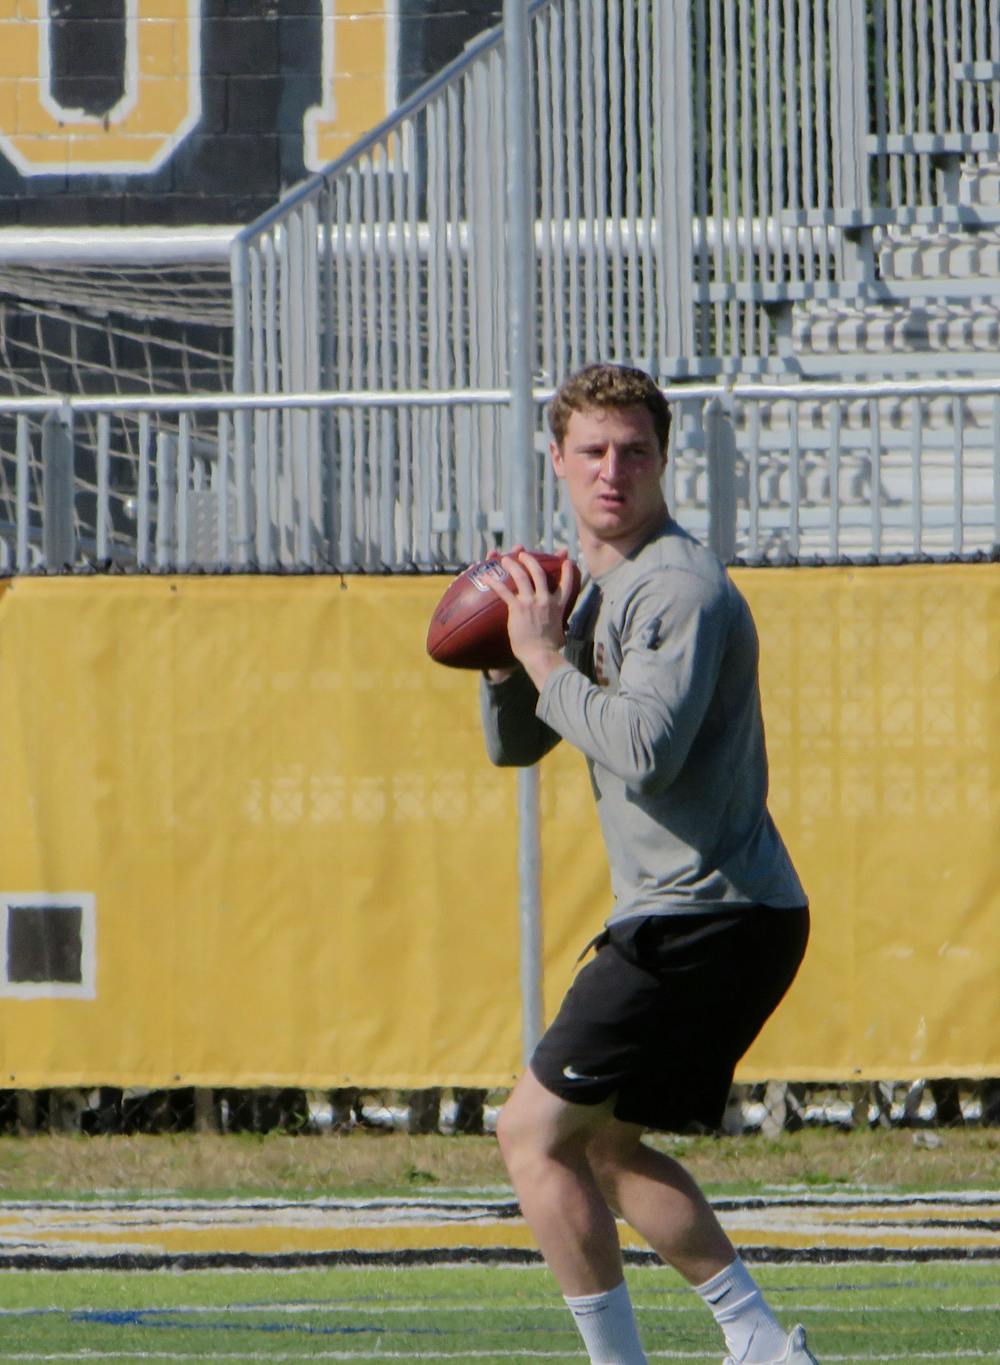 <p>Perry, seen here practicing before the Combine in Fort Myers, Fla., had the opportunity to perform throwing drills in front of scouts and to meet in person with front office personnel from various NFL teams. </p><p>Courtesy of Elizabeth Bakst</p>